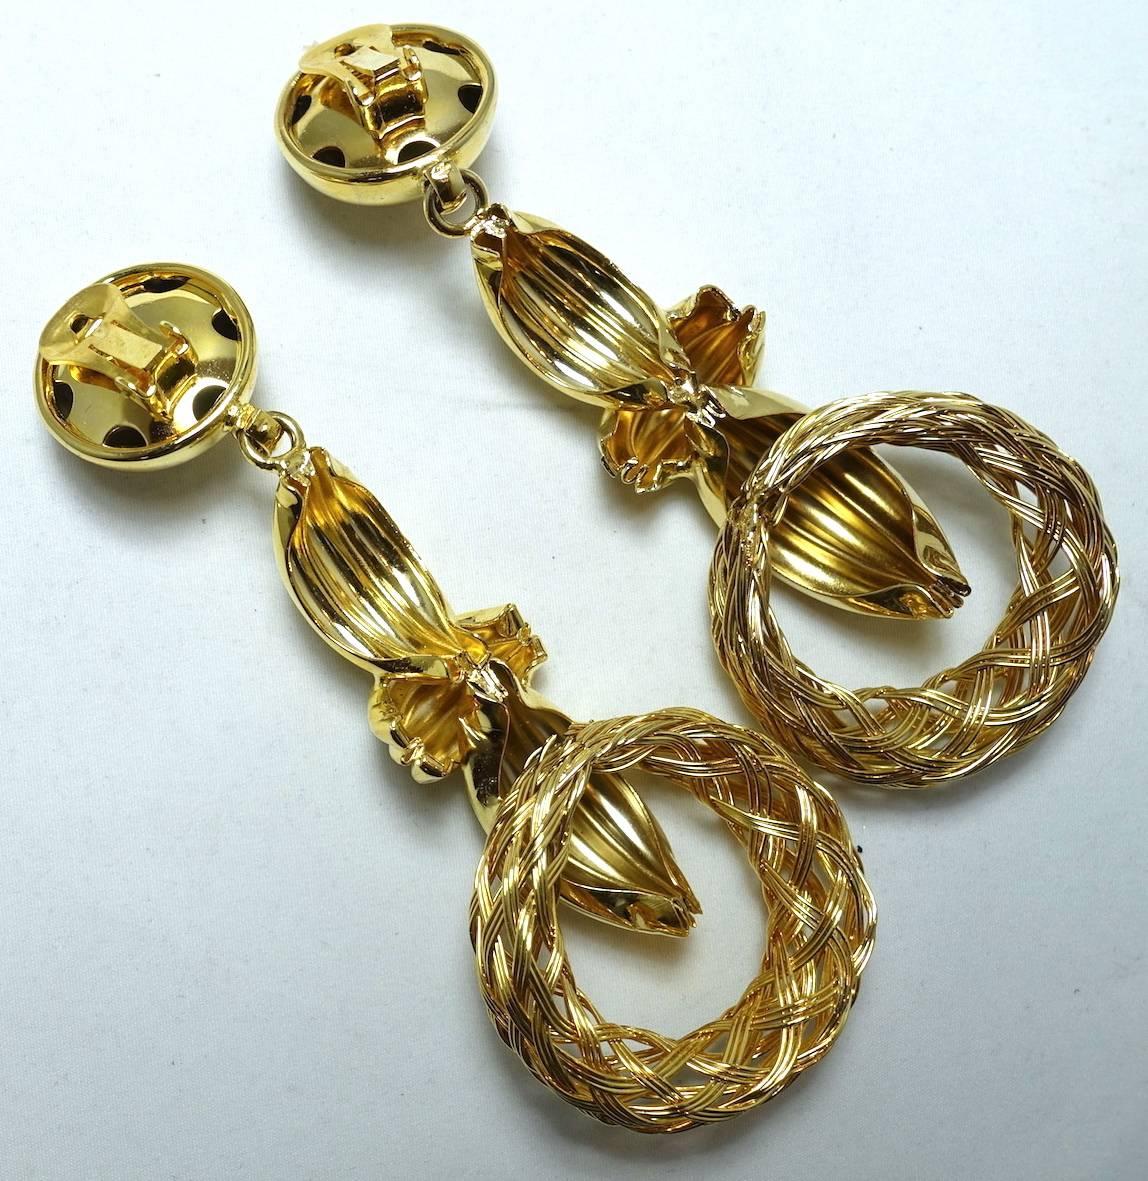 These earrings are so 80s! They have a large button top that connects to an elongated ribbed gold tone dangle with a basket weave circle at the bottom. These stunners measure a whopping 4-1/2” x 2” and are in excellent condition.